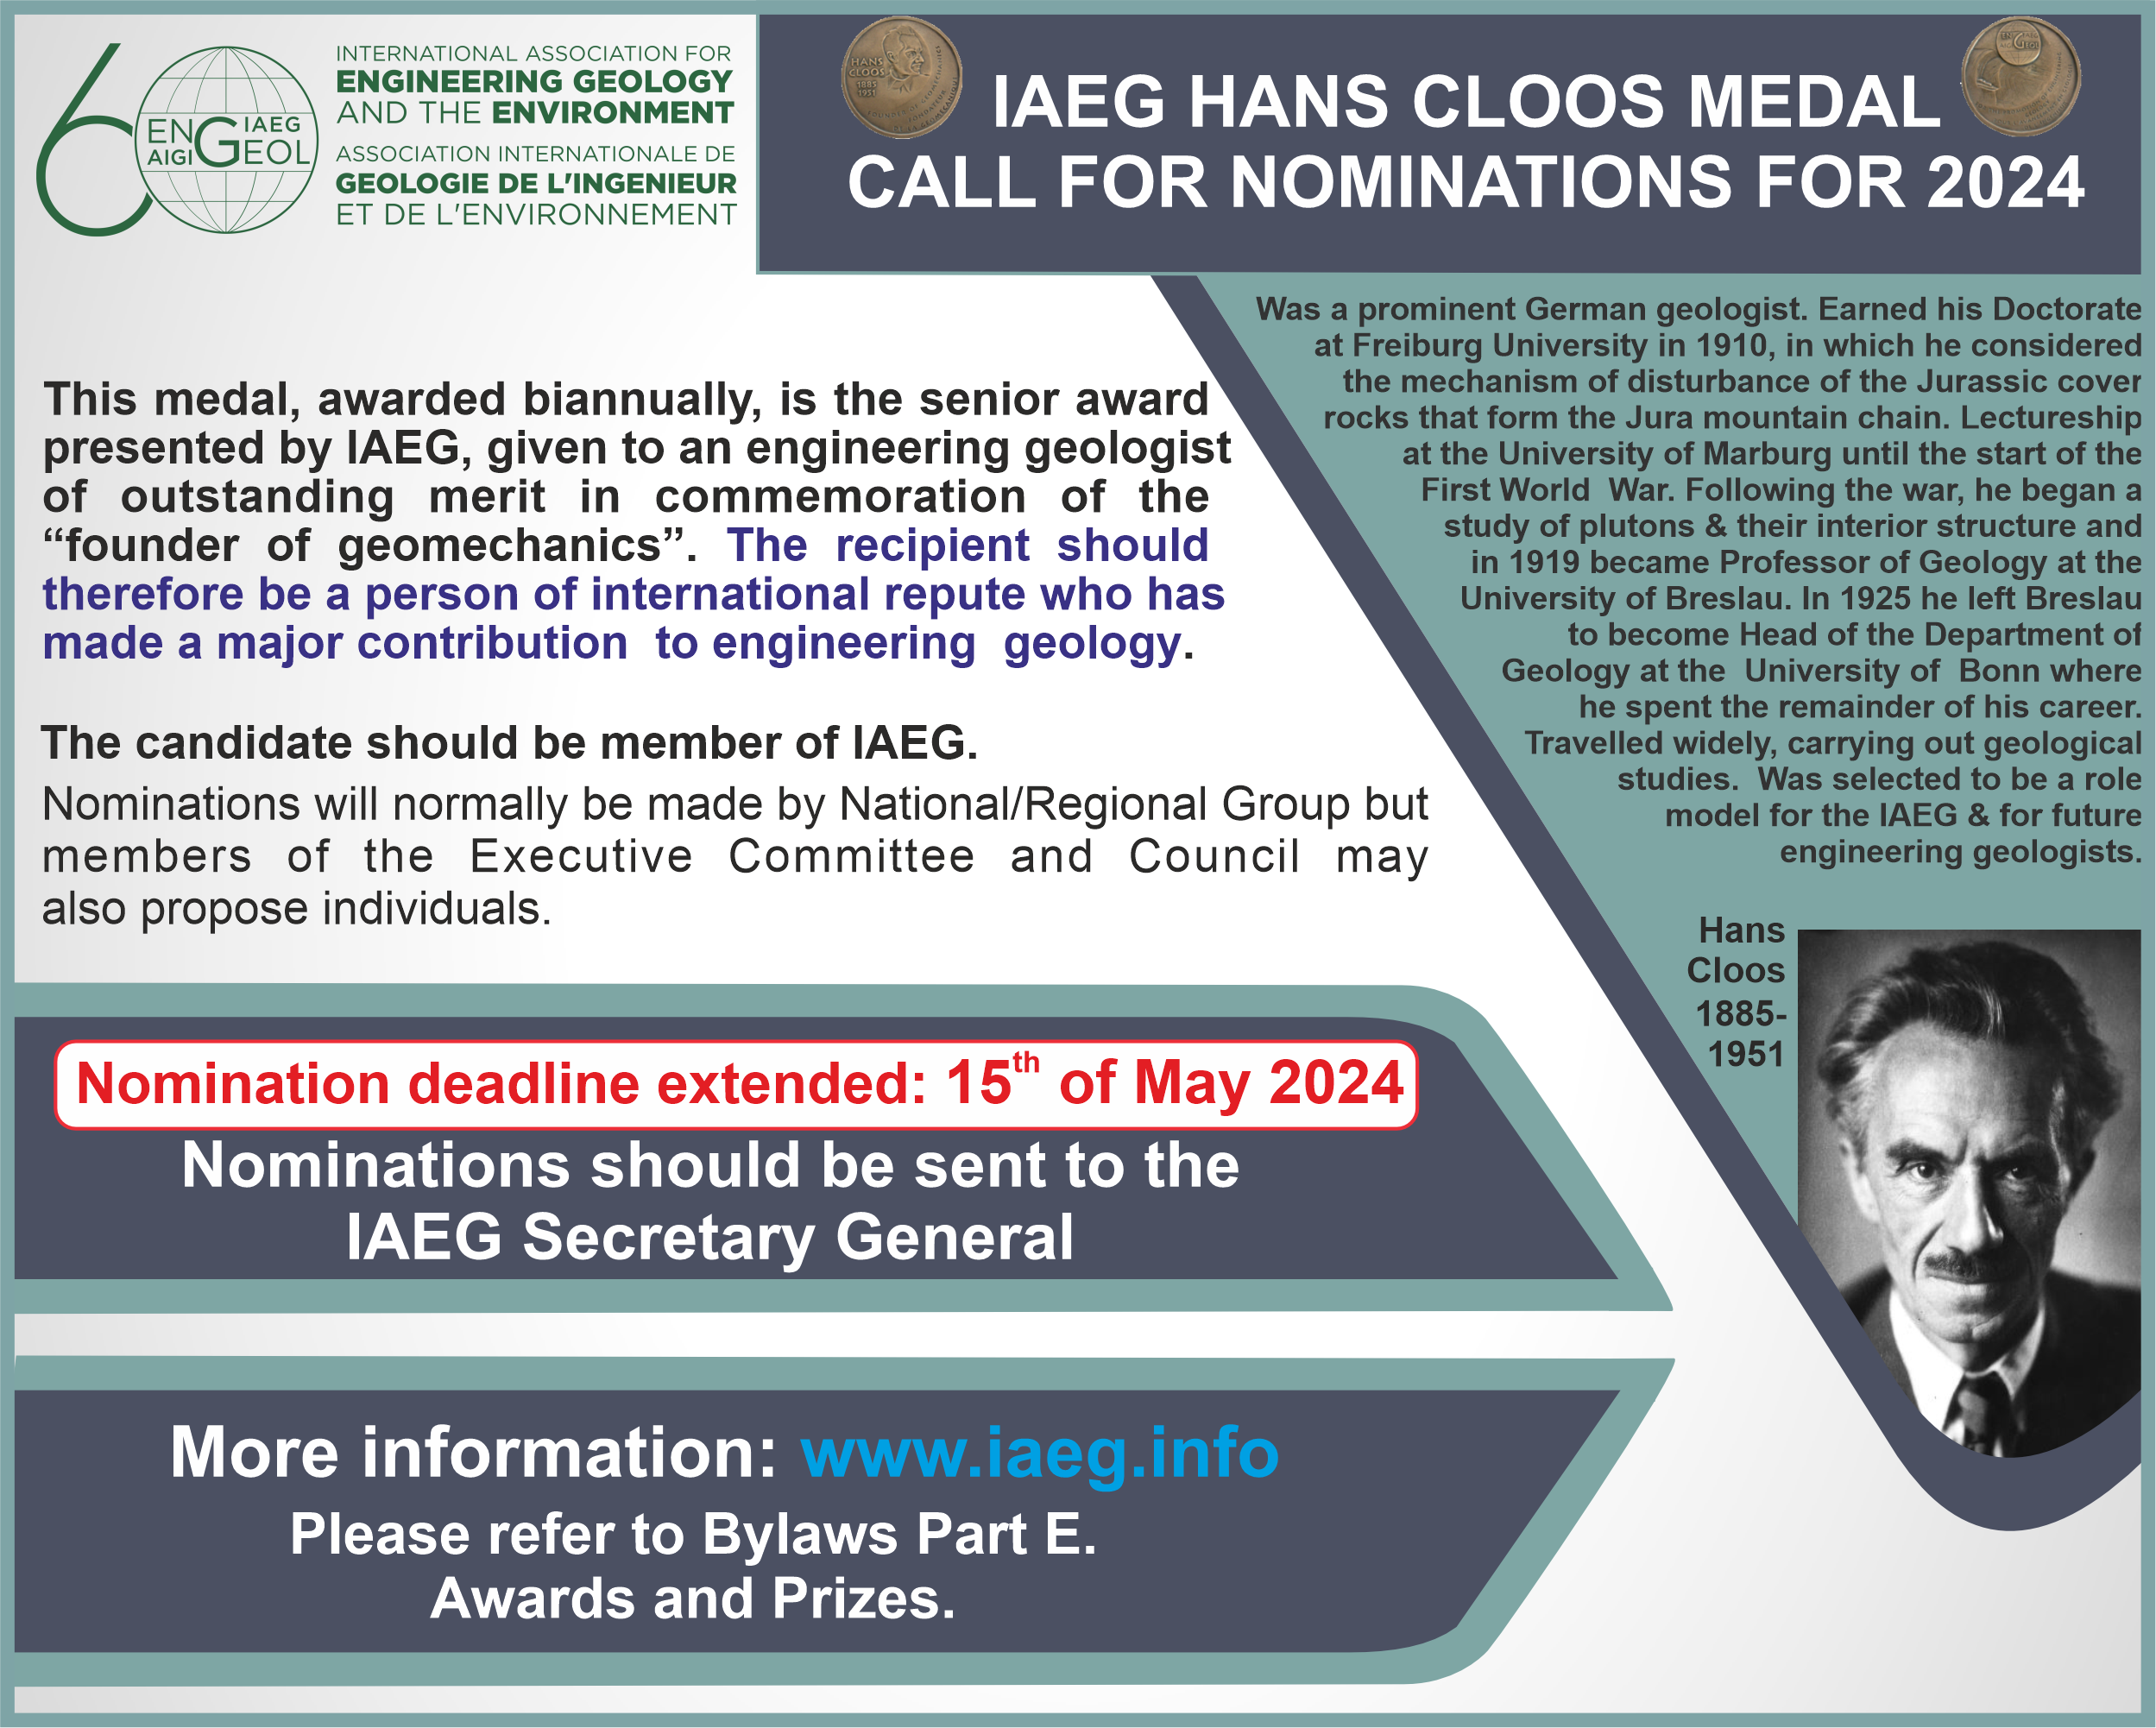 CALL FOR NOMINATIONS OF IAEG HANS CLOOS MEDAL 2024